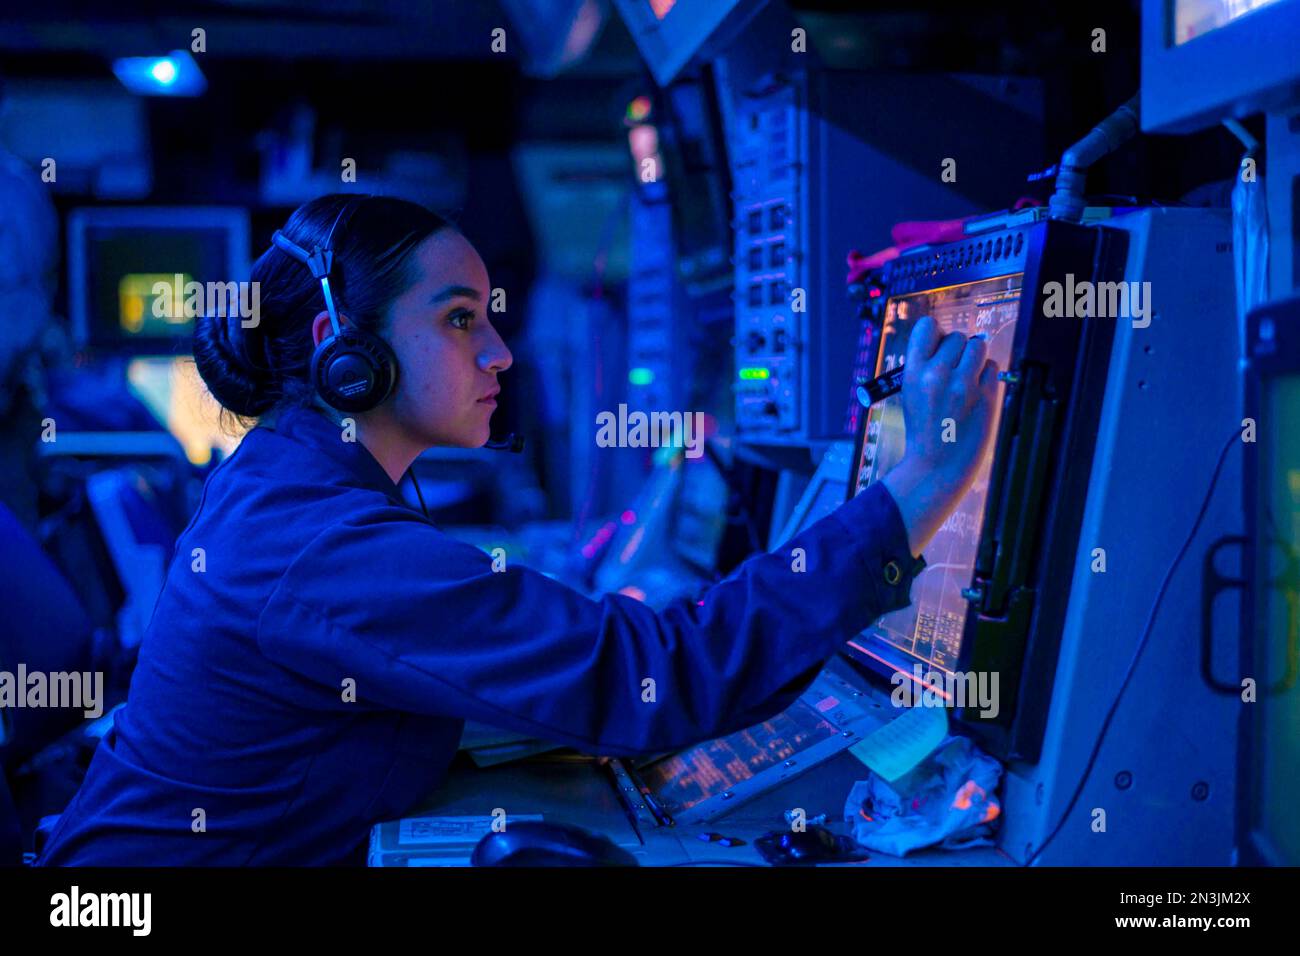 South China Sea. 1st Feb, 2023. U.S. Navy Operations Specialist 1st Class Nancy Ayala, from Orange Cove, Calif., stands watch in the combat information center aboard the Arleigh Burke-class guided-missile destroyer USS Wayne E. Meyer (DDG 108). Wayne E. Meyer, part of the Nimitz Carrier Strike Group, is in U.S. 7th Fleet conducting routine operations. 7th Fleet is the U.S. Navys largest forward-deployed numbered fleet, and routinely interacts and operates with Allies and partners in preserving a free and open Indo-Pacific region. (Credit Image: © U.S. Navy/ZUMA Press Wire Service/ZUMAPRES Stock Photo